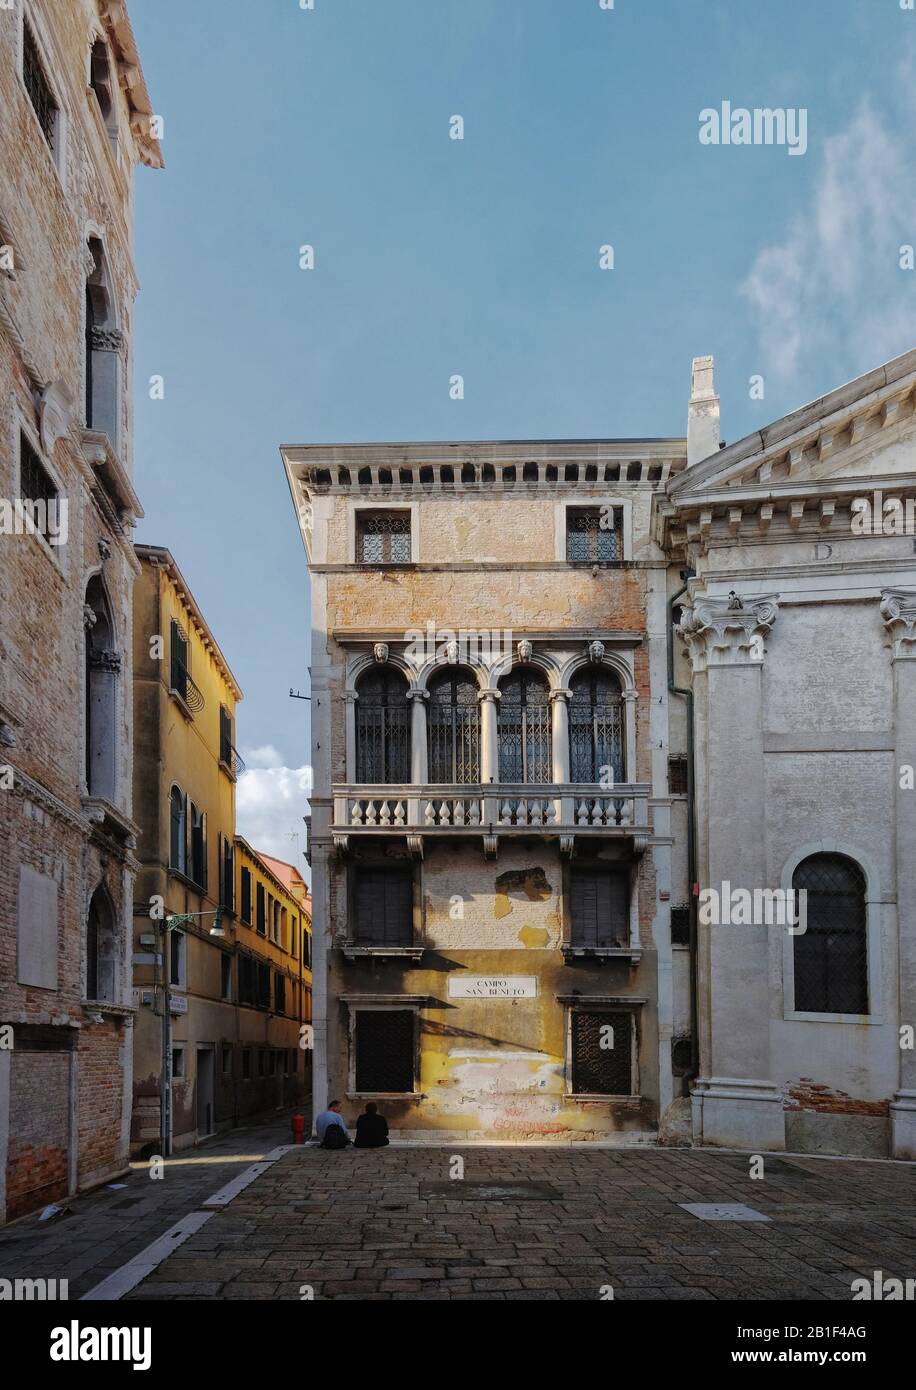 Campo San Beneto, a palazzo with ornate, arch columned and balustraded balcony beside Chiesa di San Beneto, Venice Italy, photographed in high def. Stock Photo